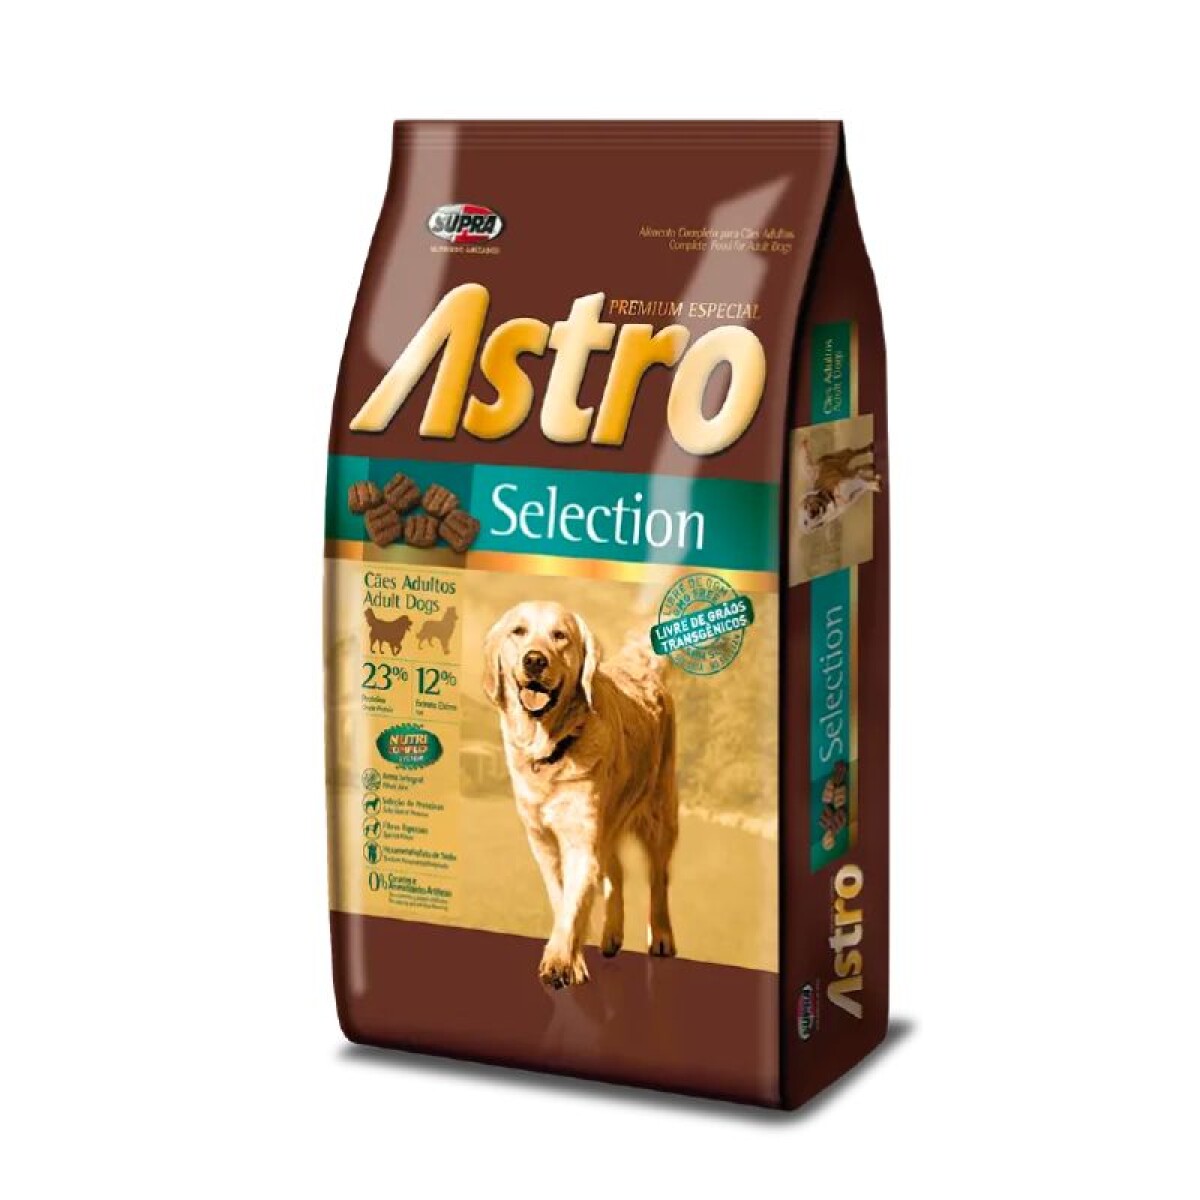 ASTRO SELECTION 1KG - Astro Selection 1kg 